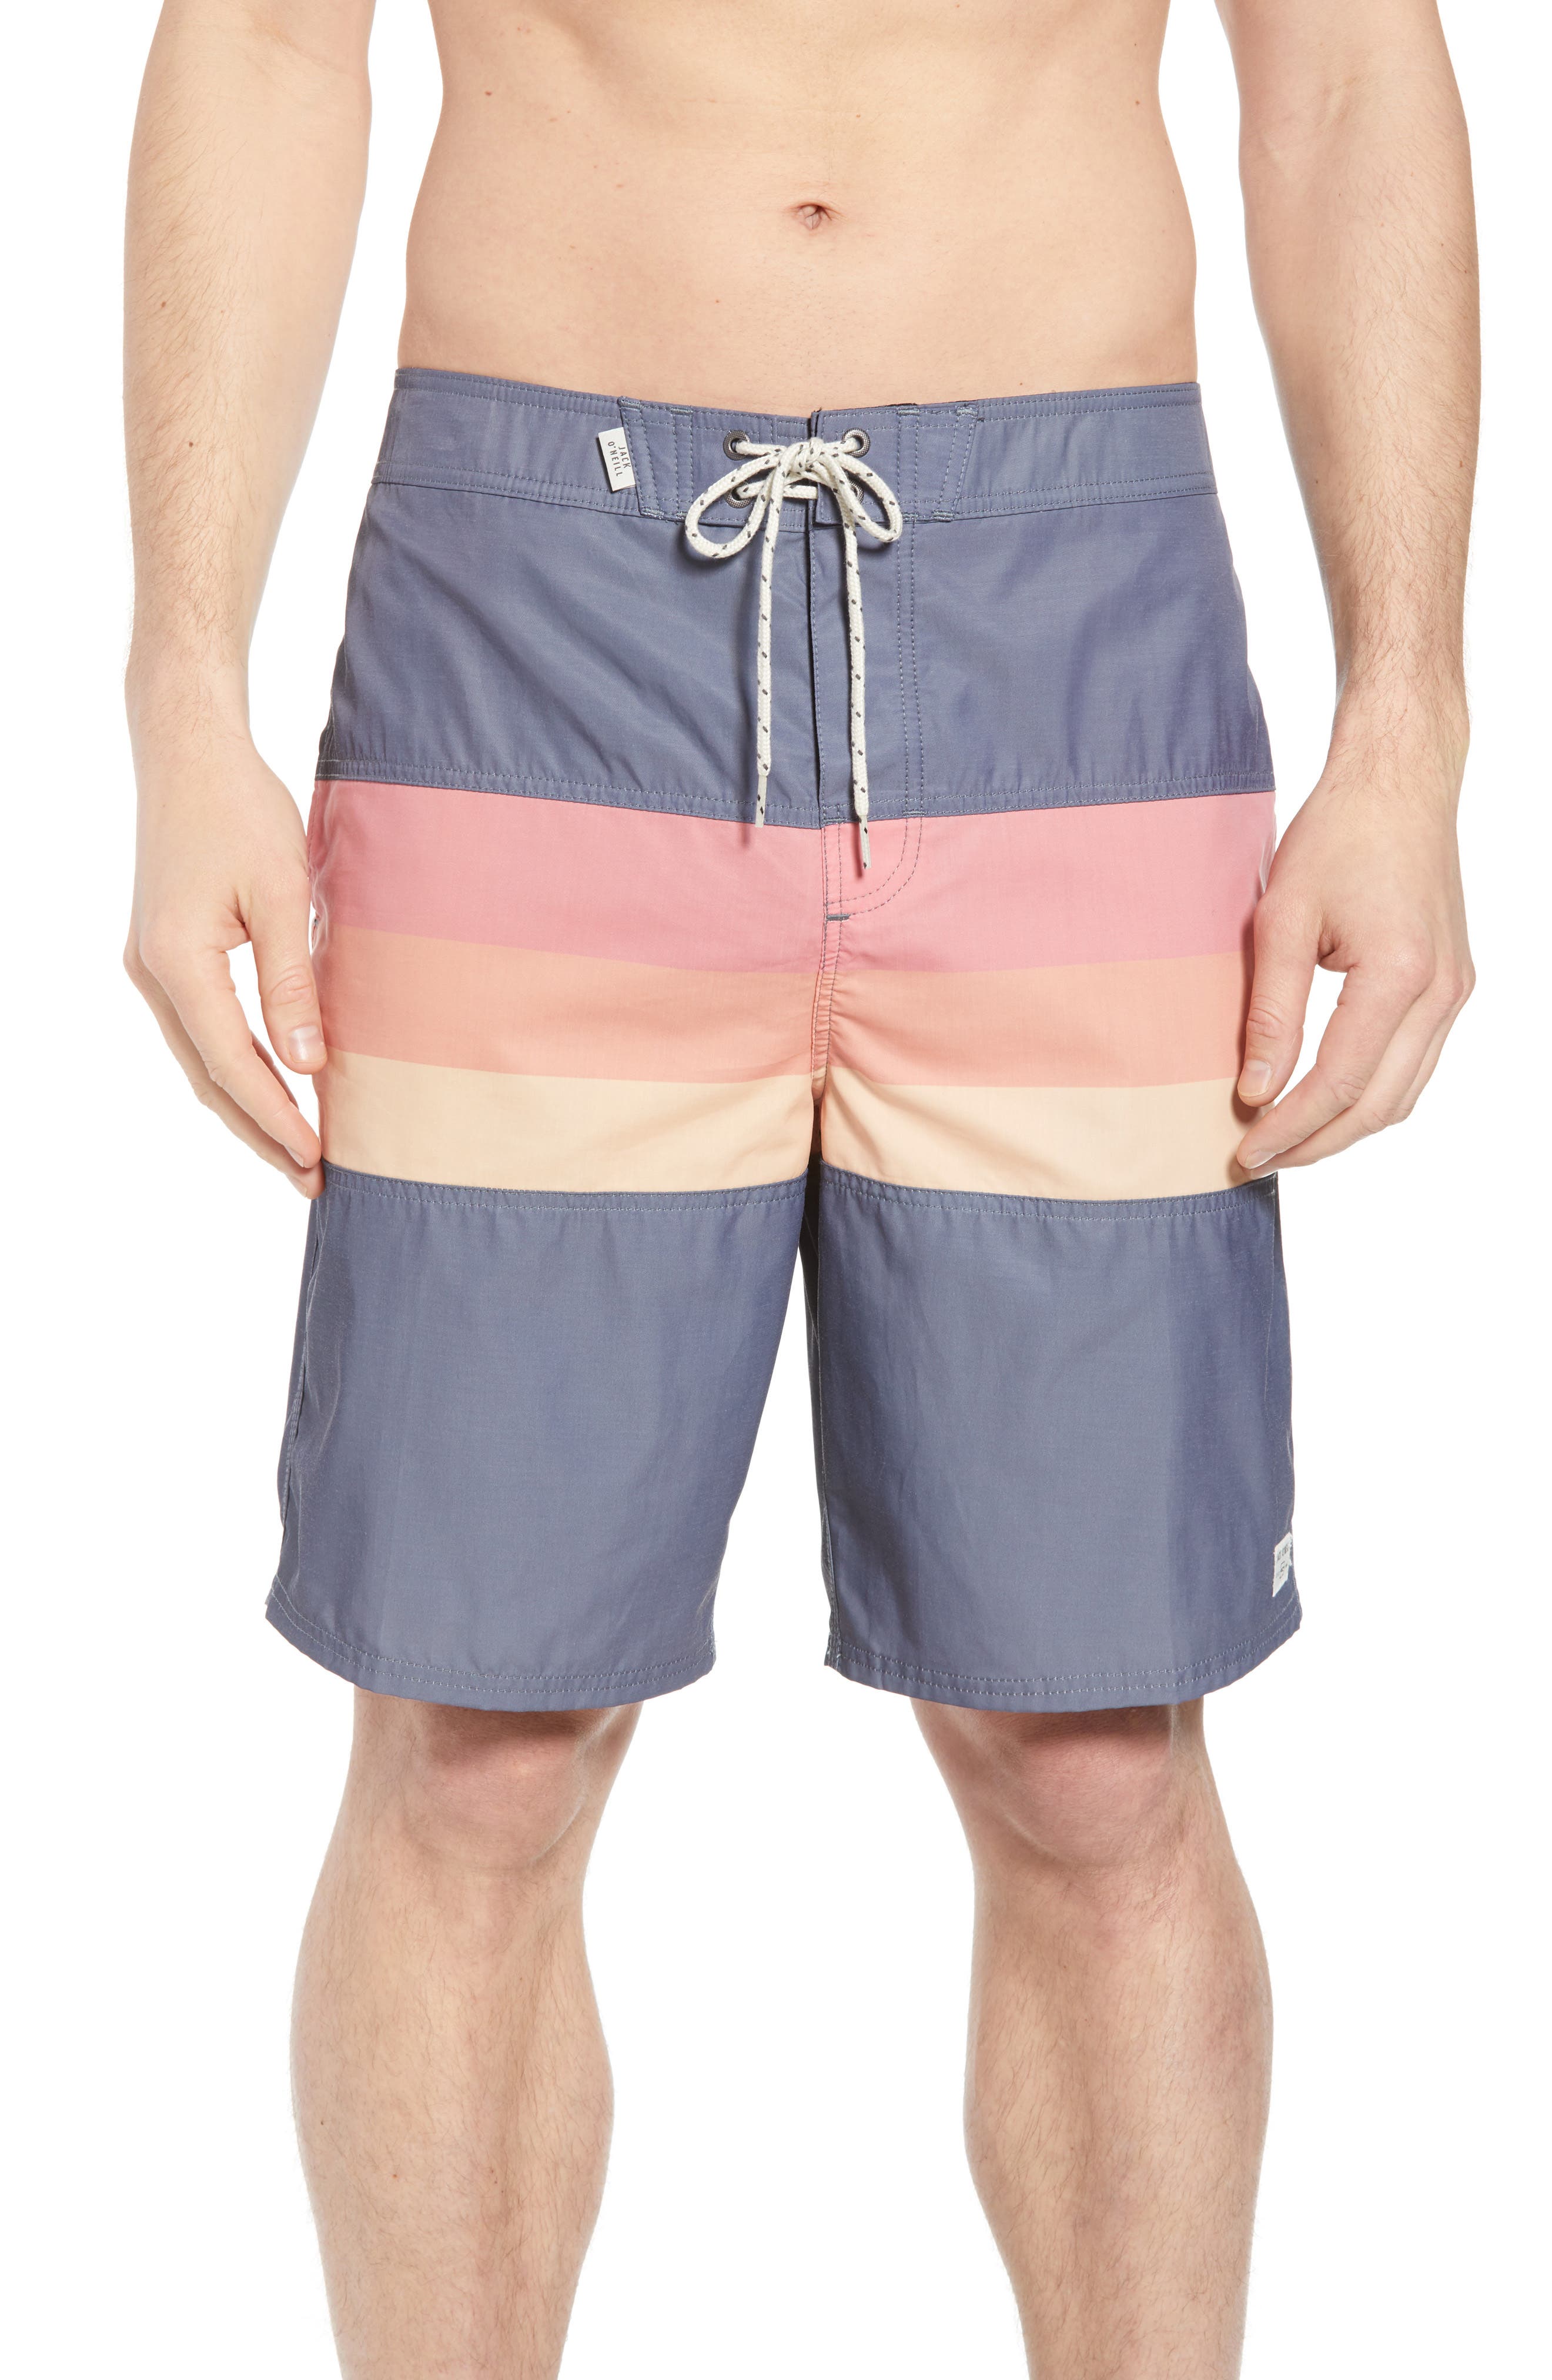 Harbor Bay by DXL Big and Tall 4-Way Stretch Solid Swim Trunks